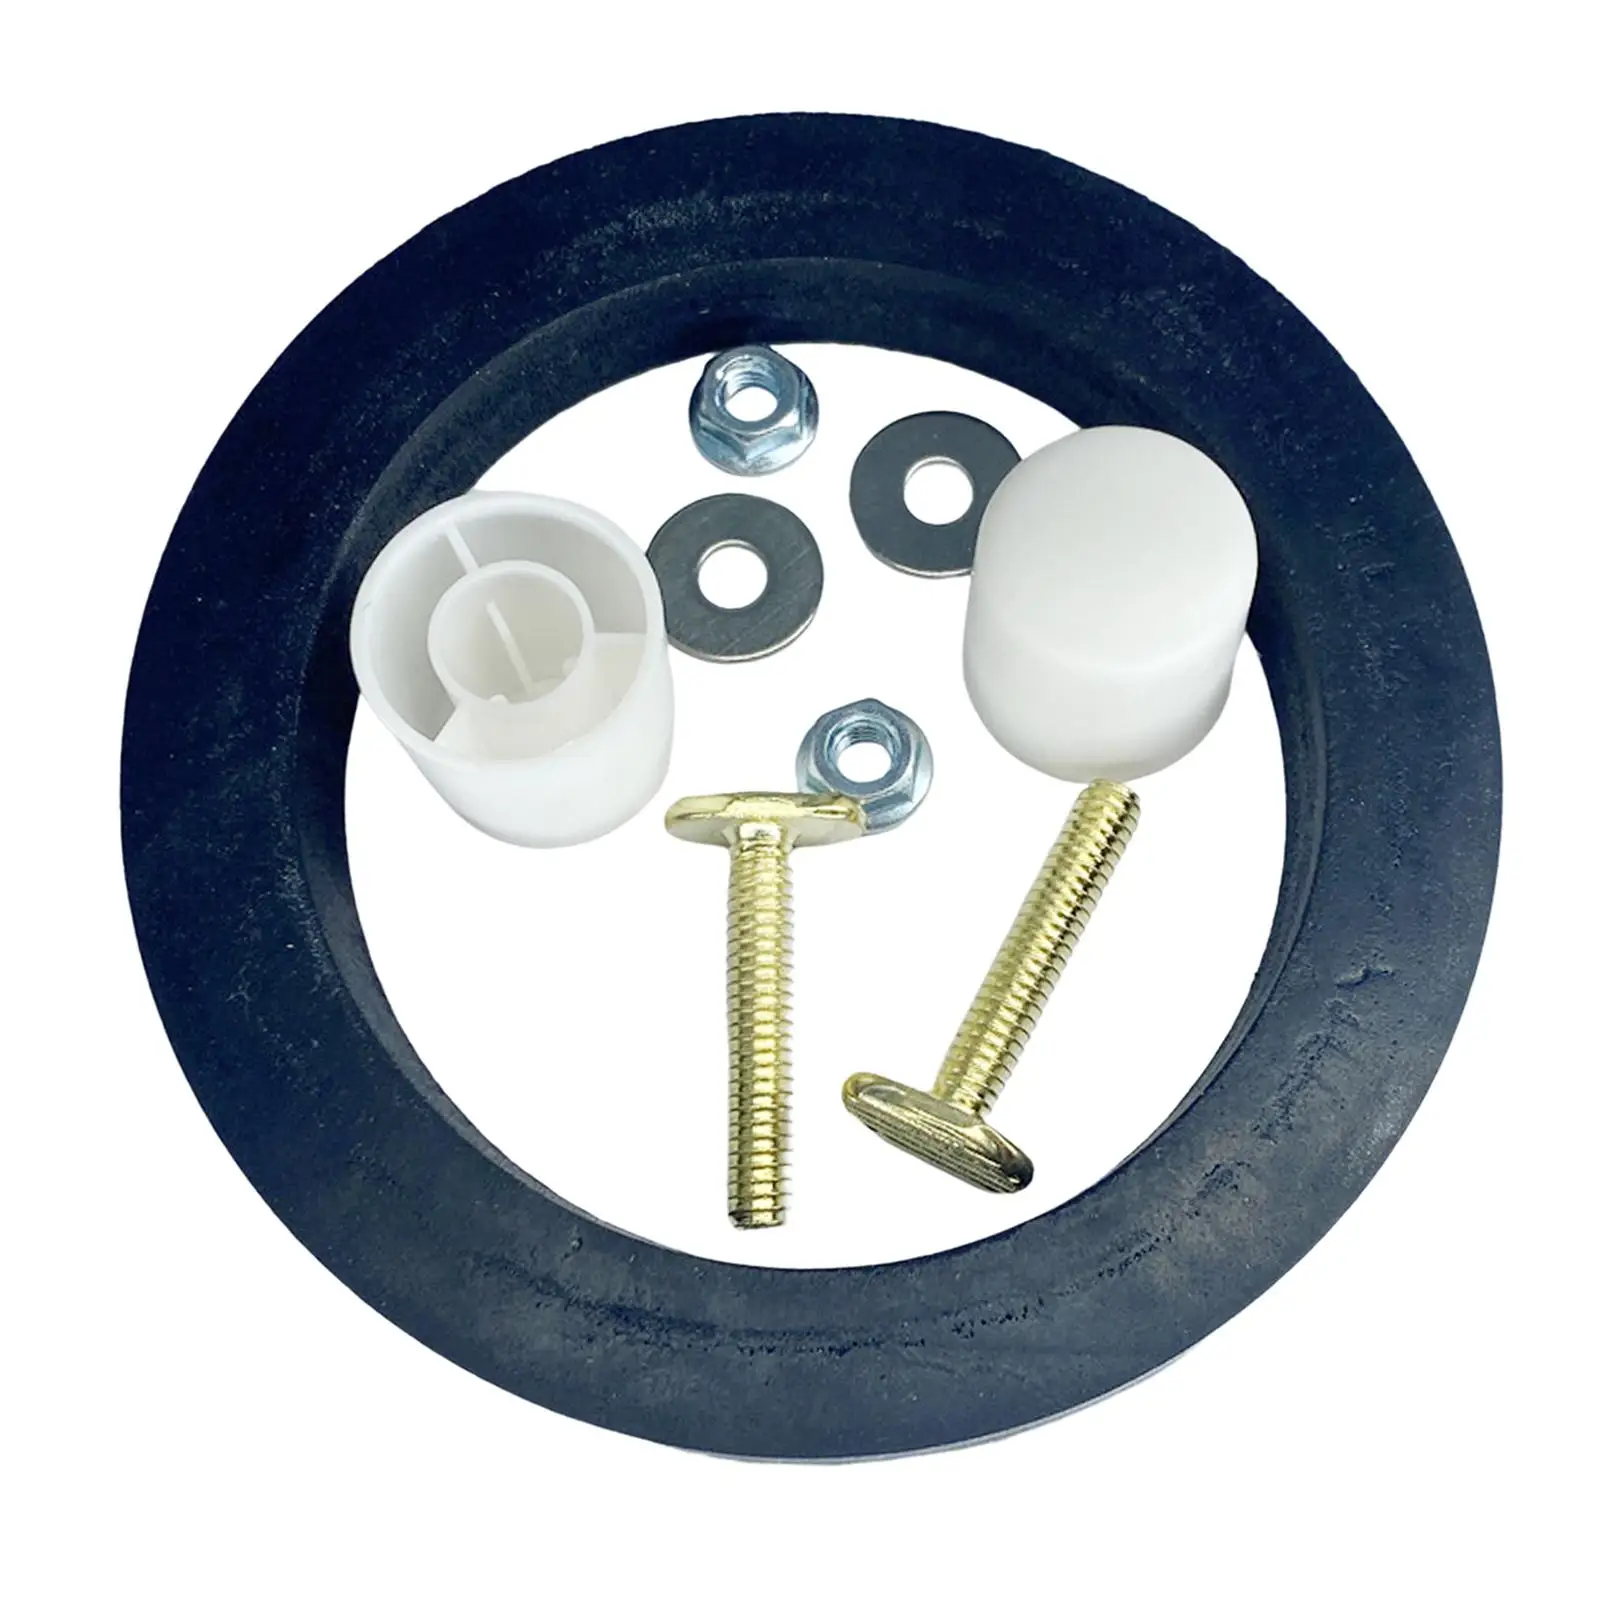 Seal Gasket of RV Toilet for 300, 310, 320 Series with Brass Bolts, Nuts and